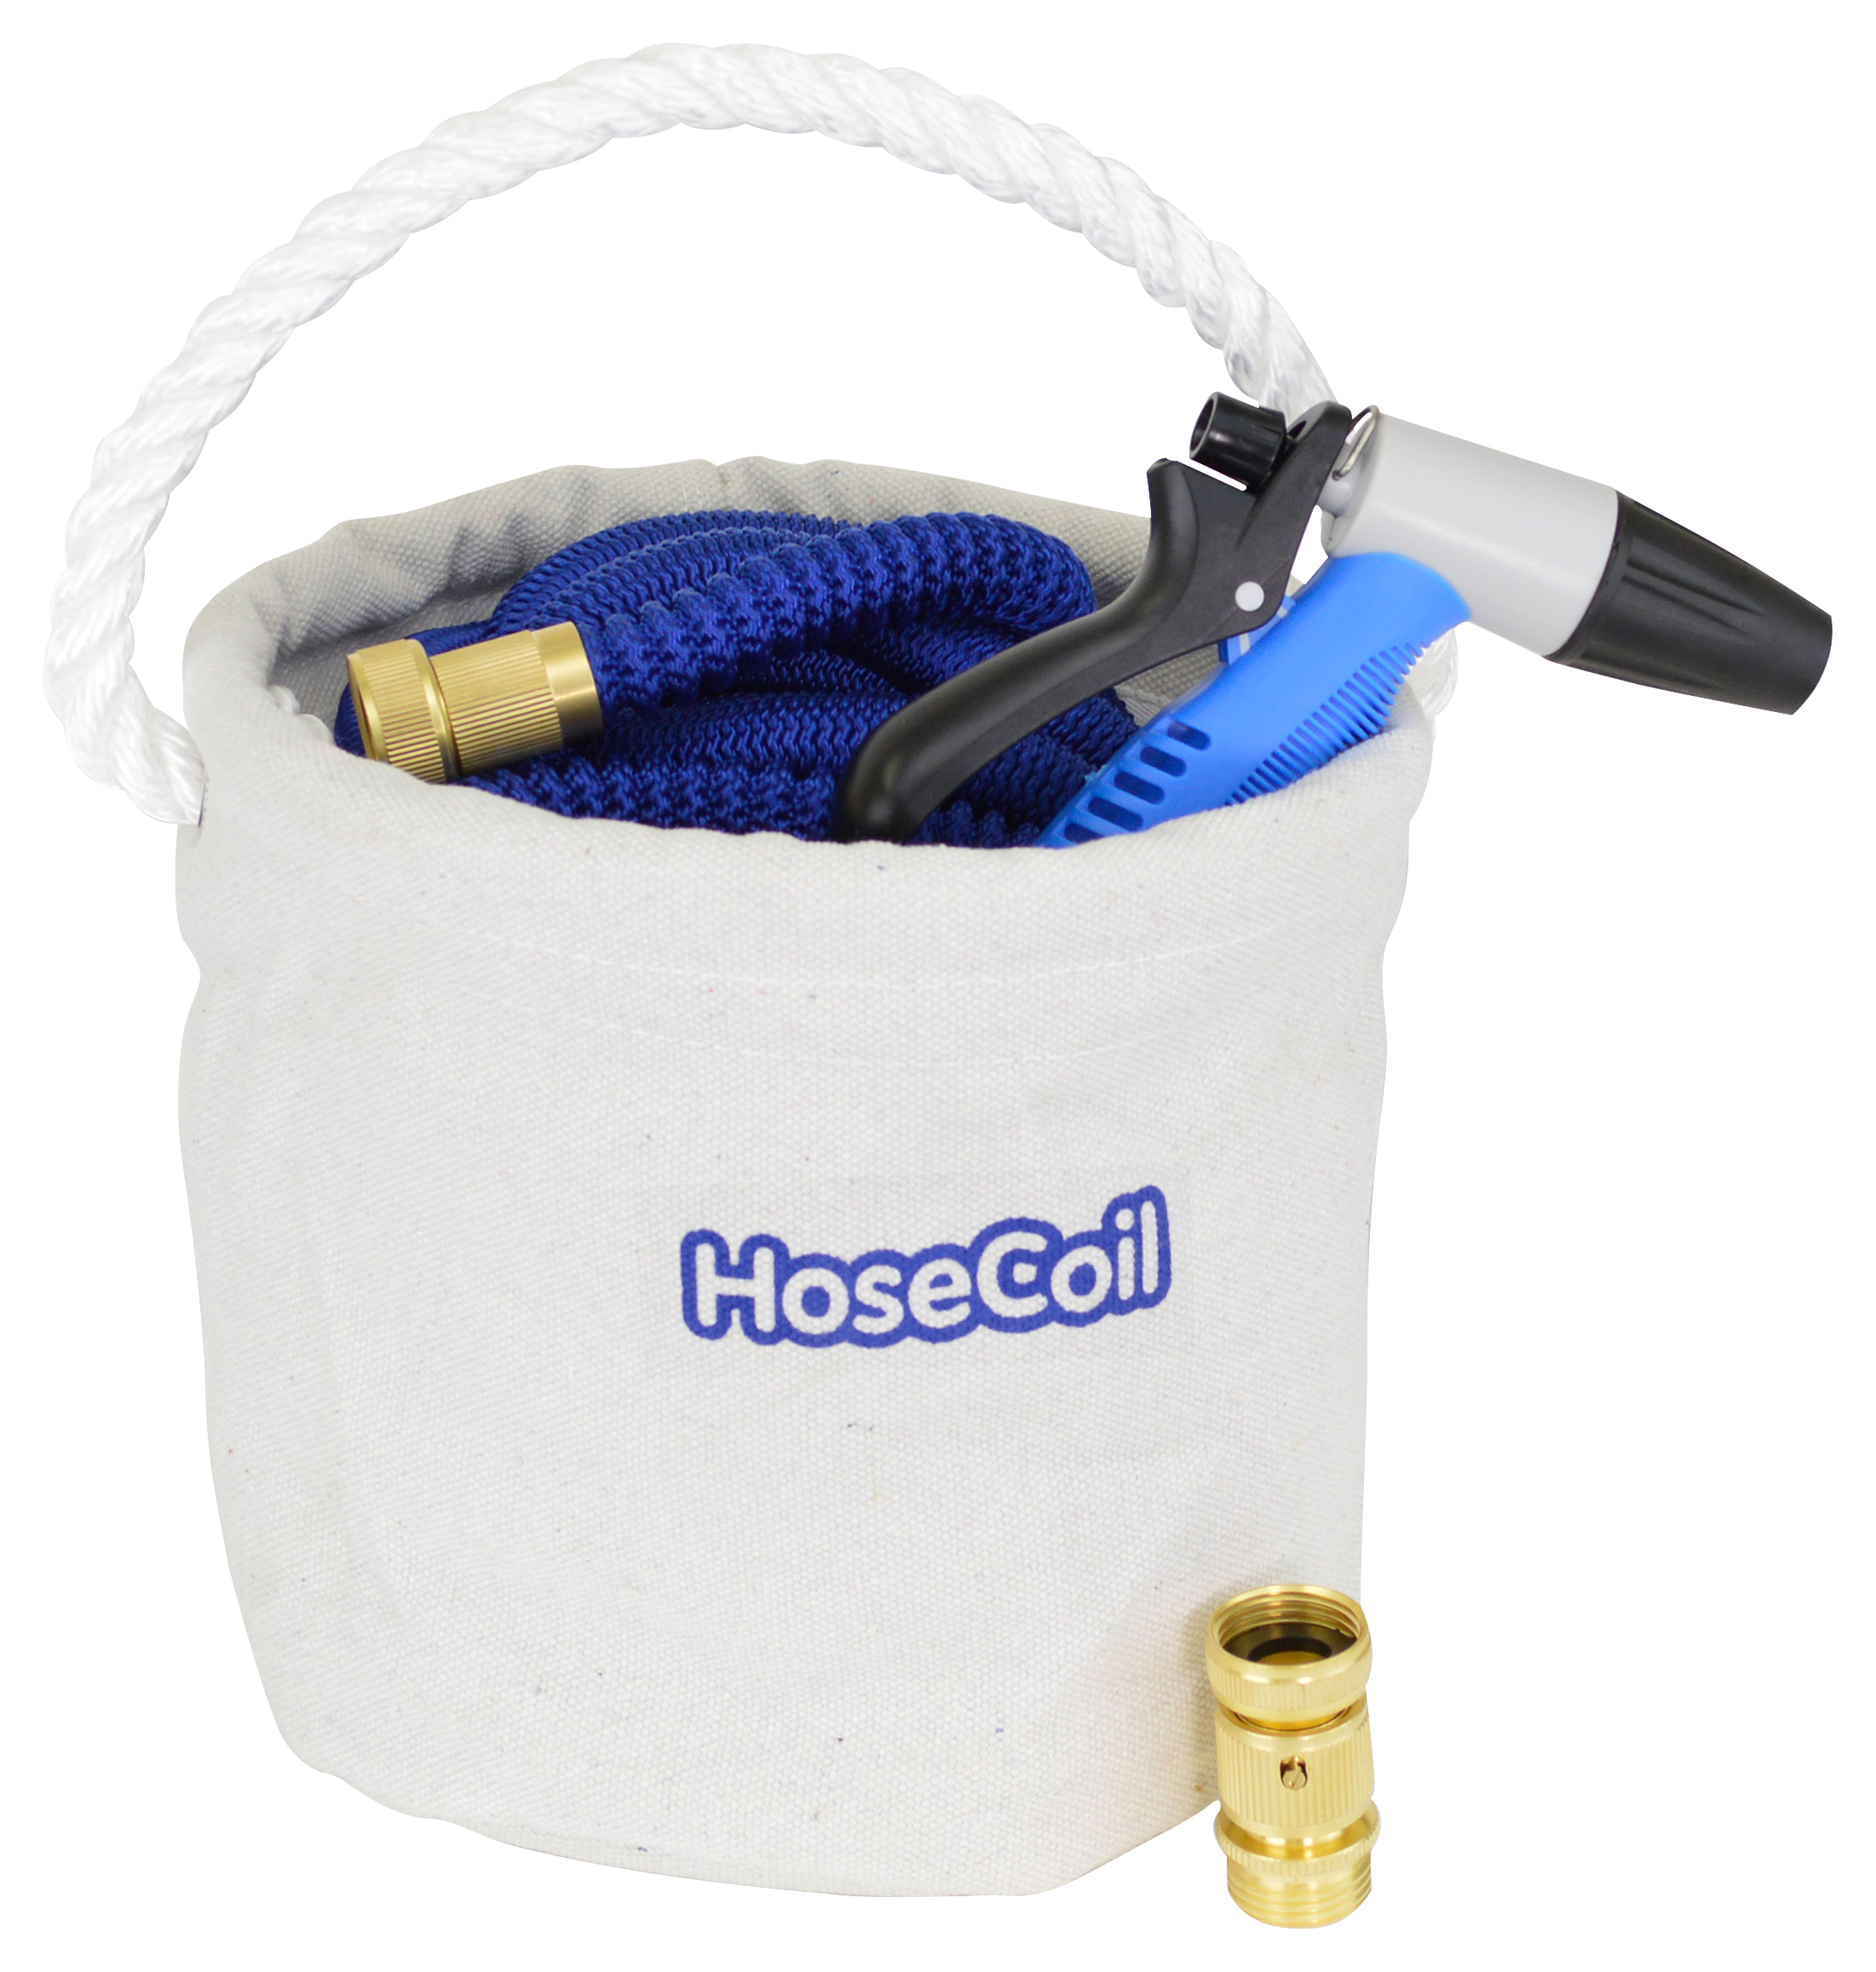 Hosecoil Canvas Bucket Kit with 75' Expandable Hose, Rubber-Tip Nozzle, and Quick Release